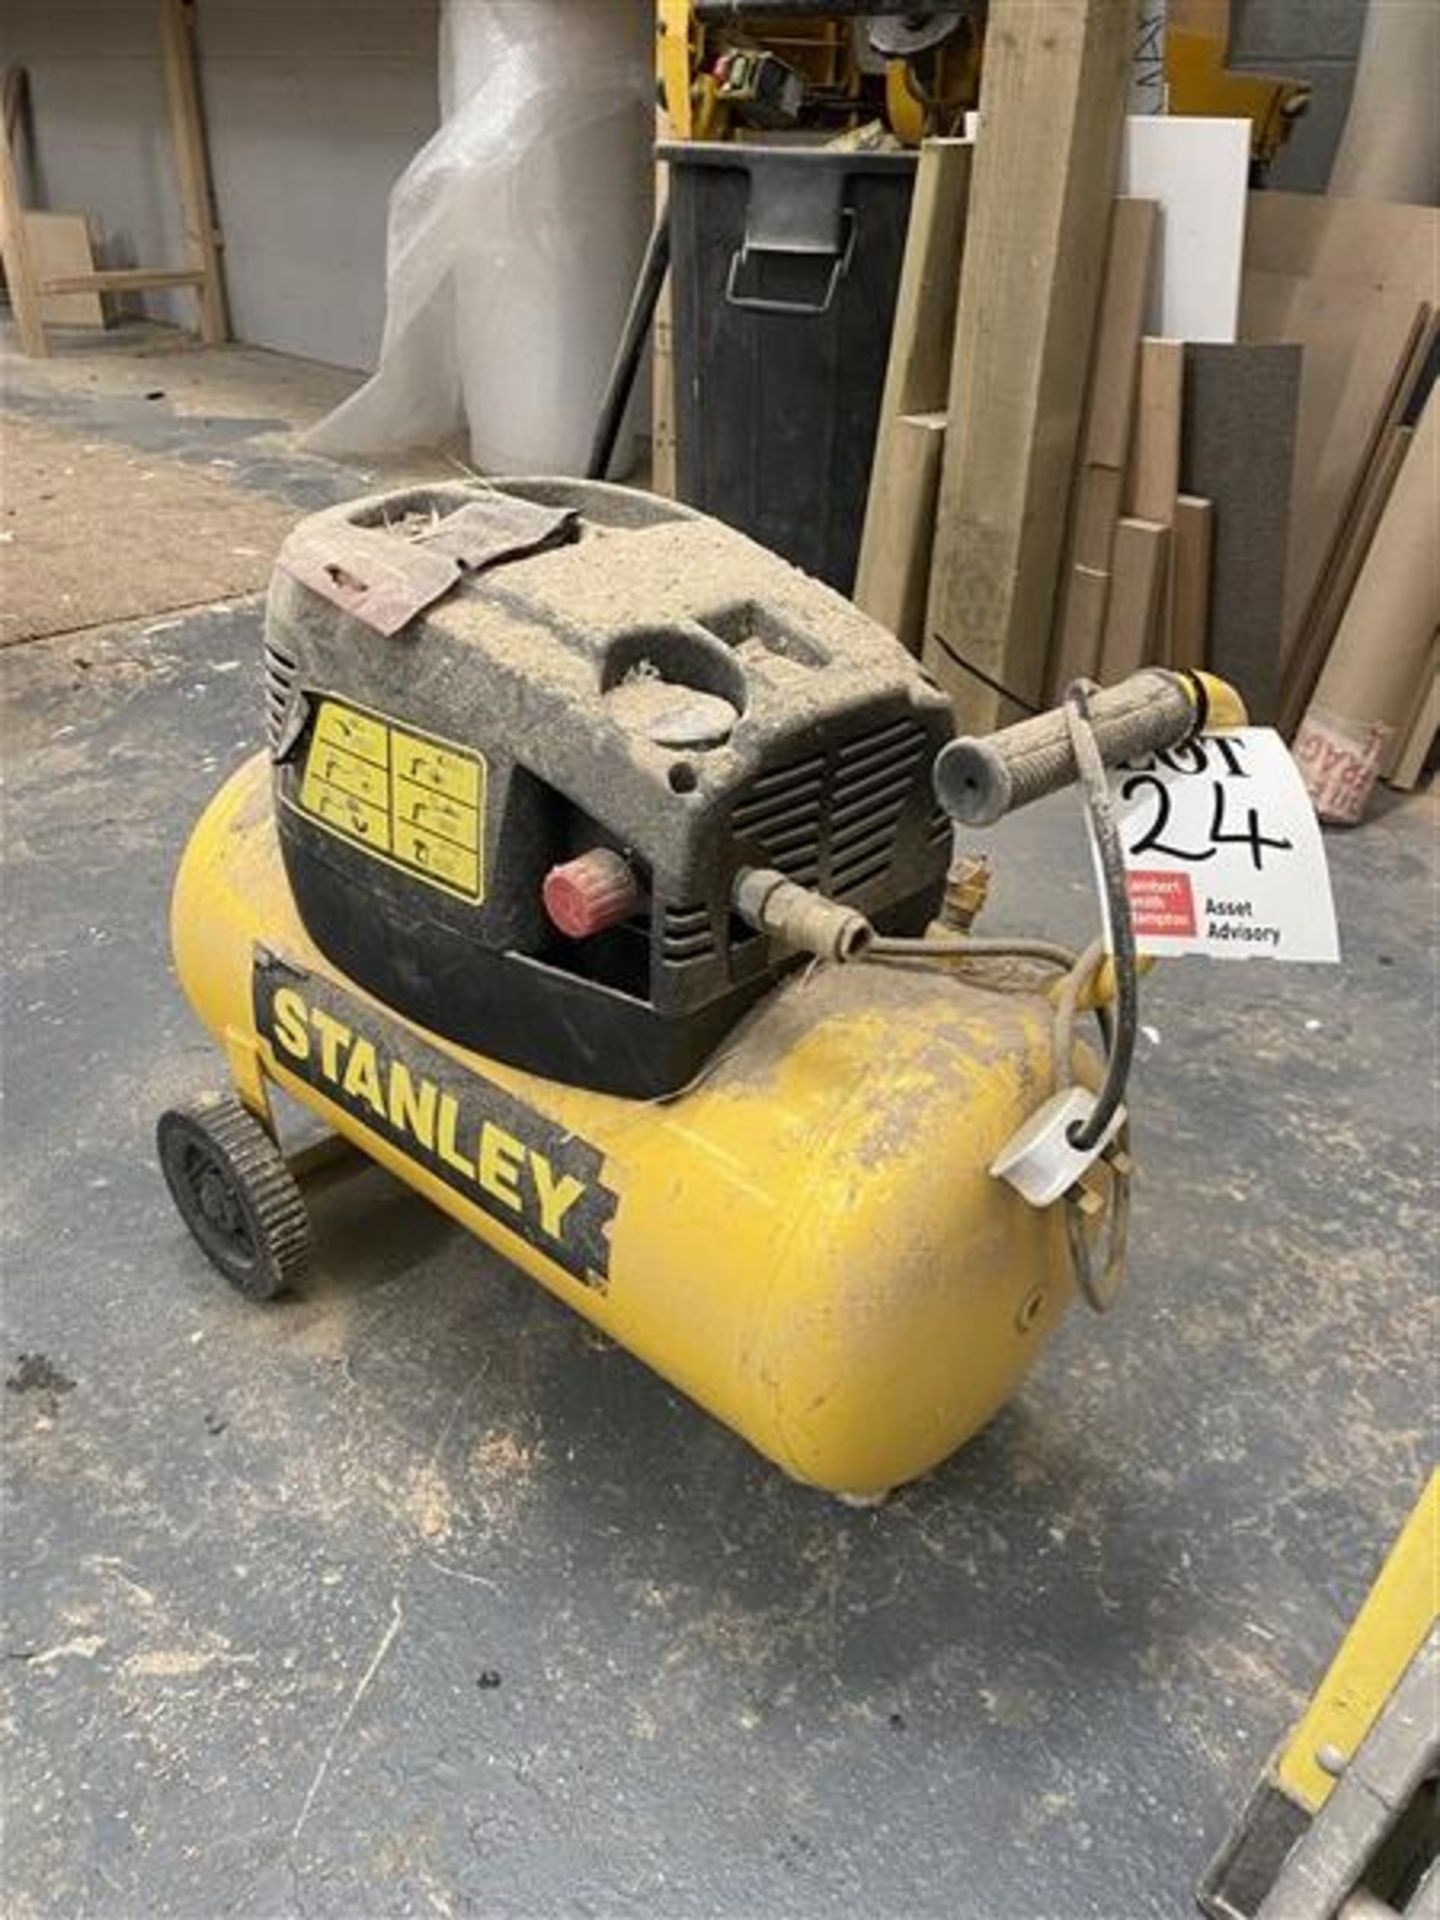 Stanley mobile 240V air compressor and an ABS mobile air compressor